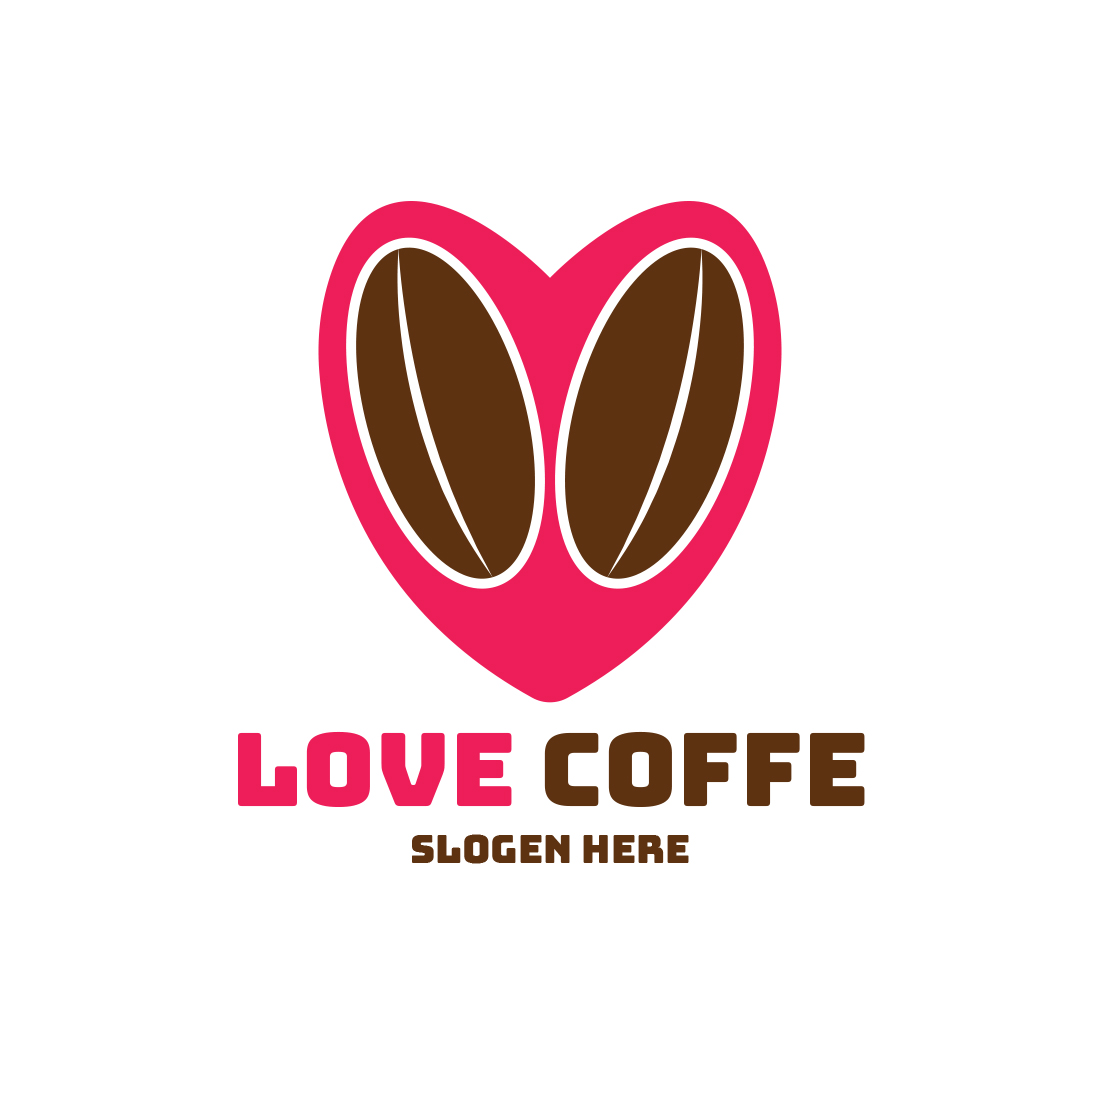 Love Coffee Logo Template cover image.